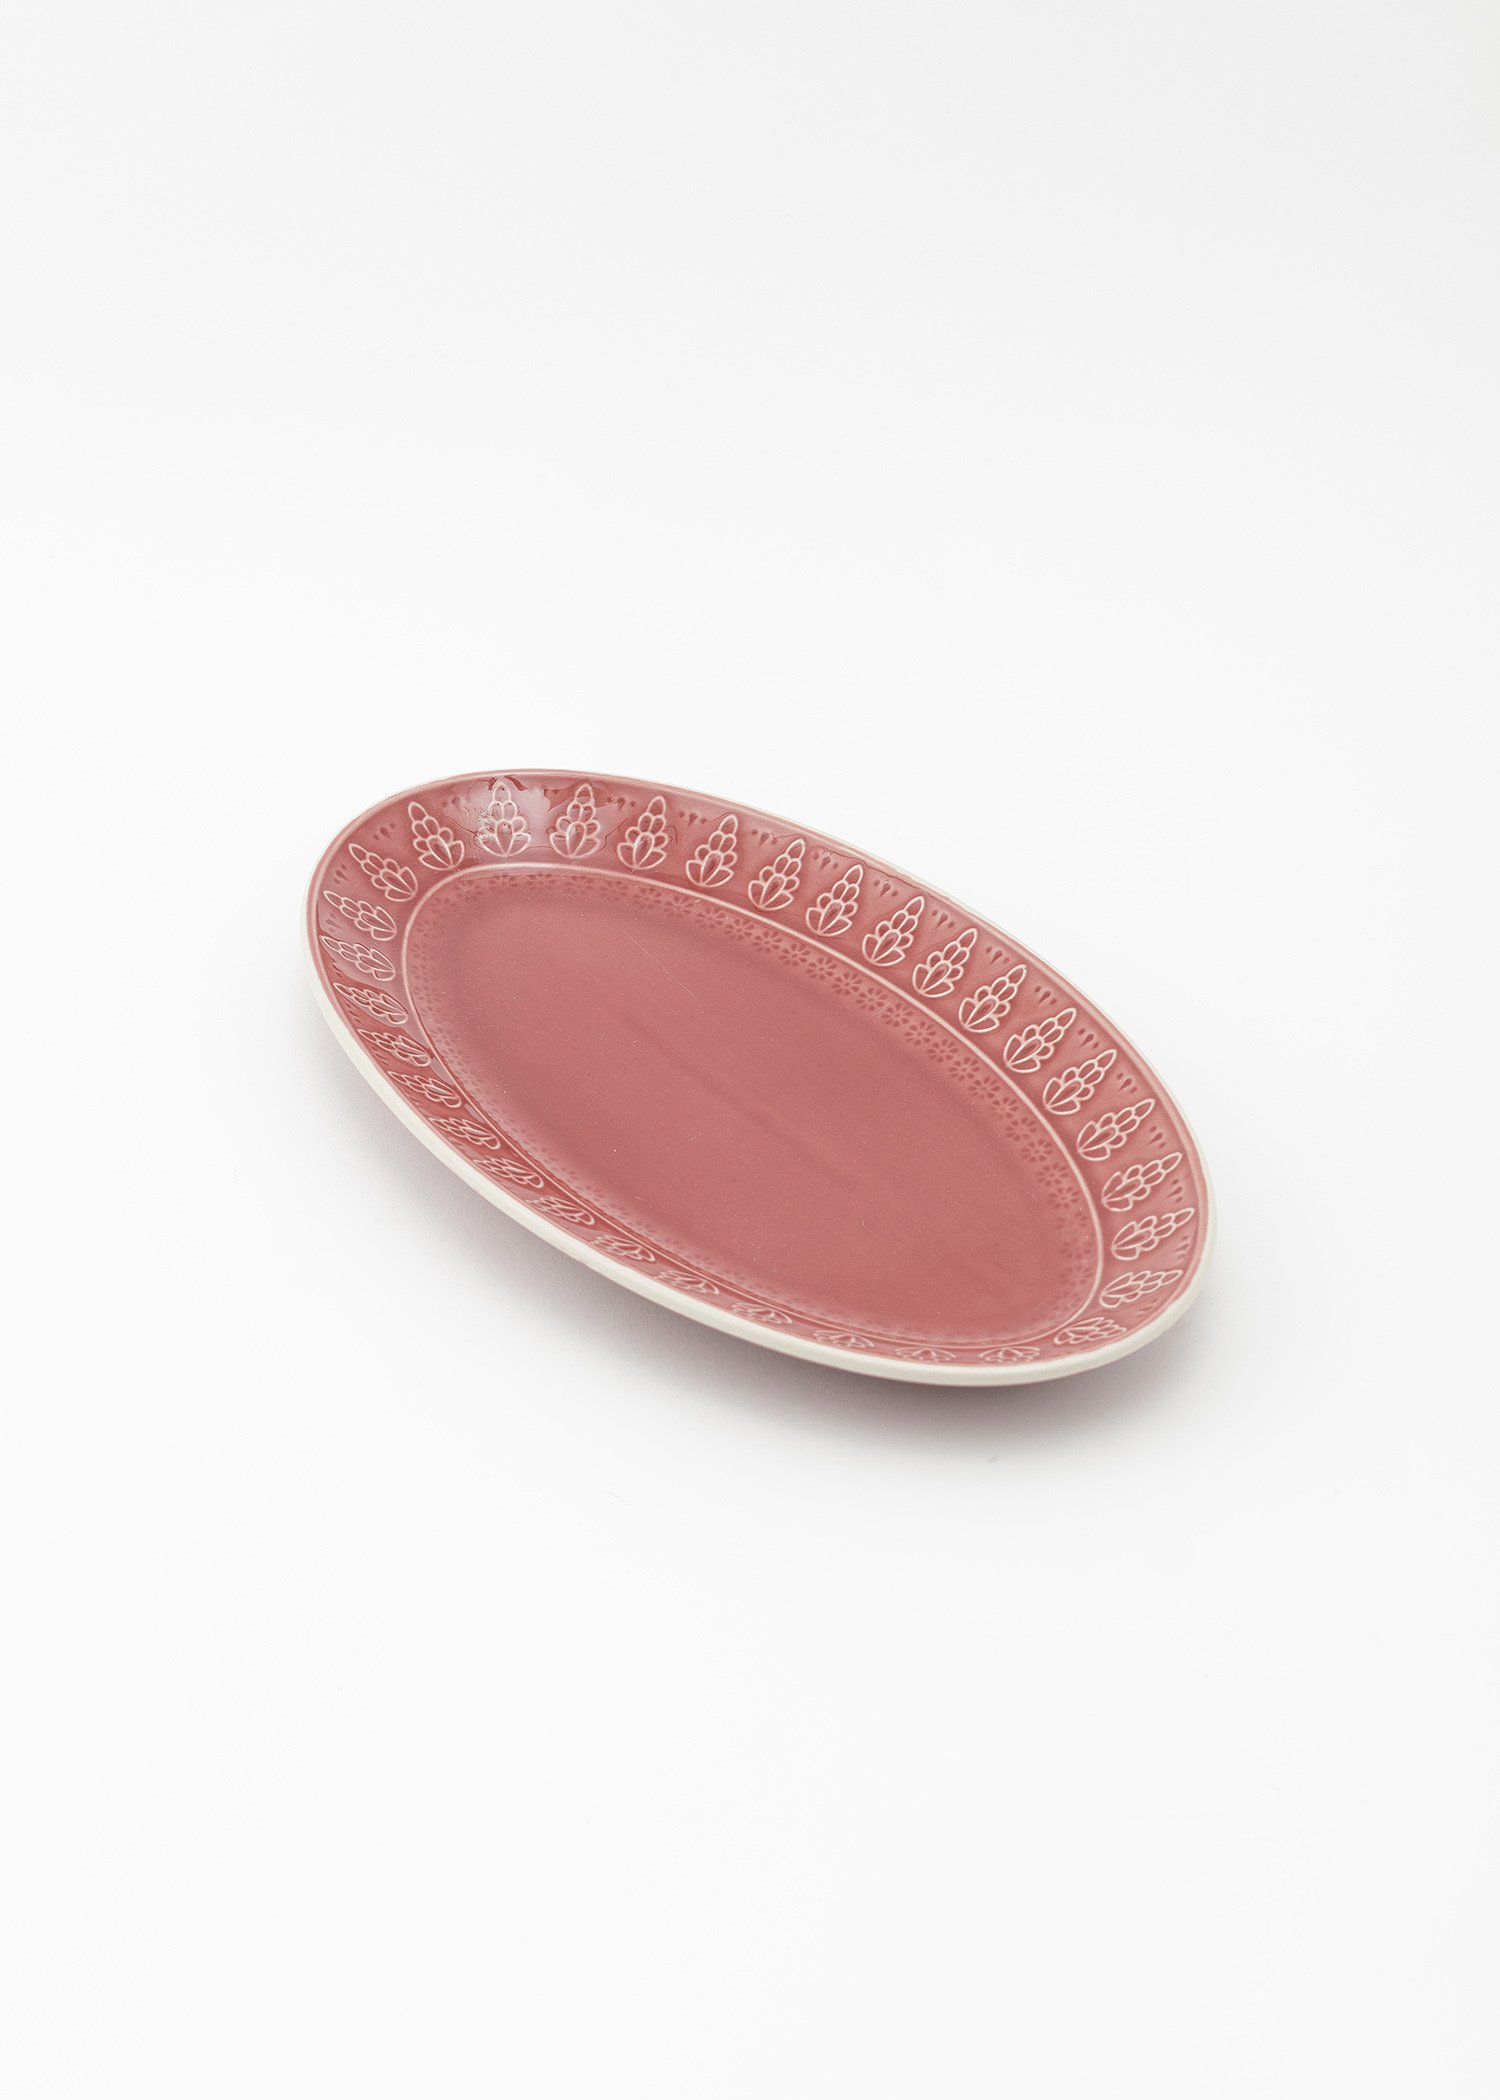 Stoneware oval serving plate Image 2